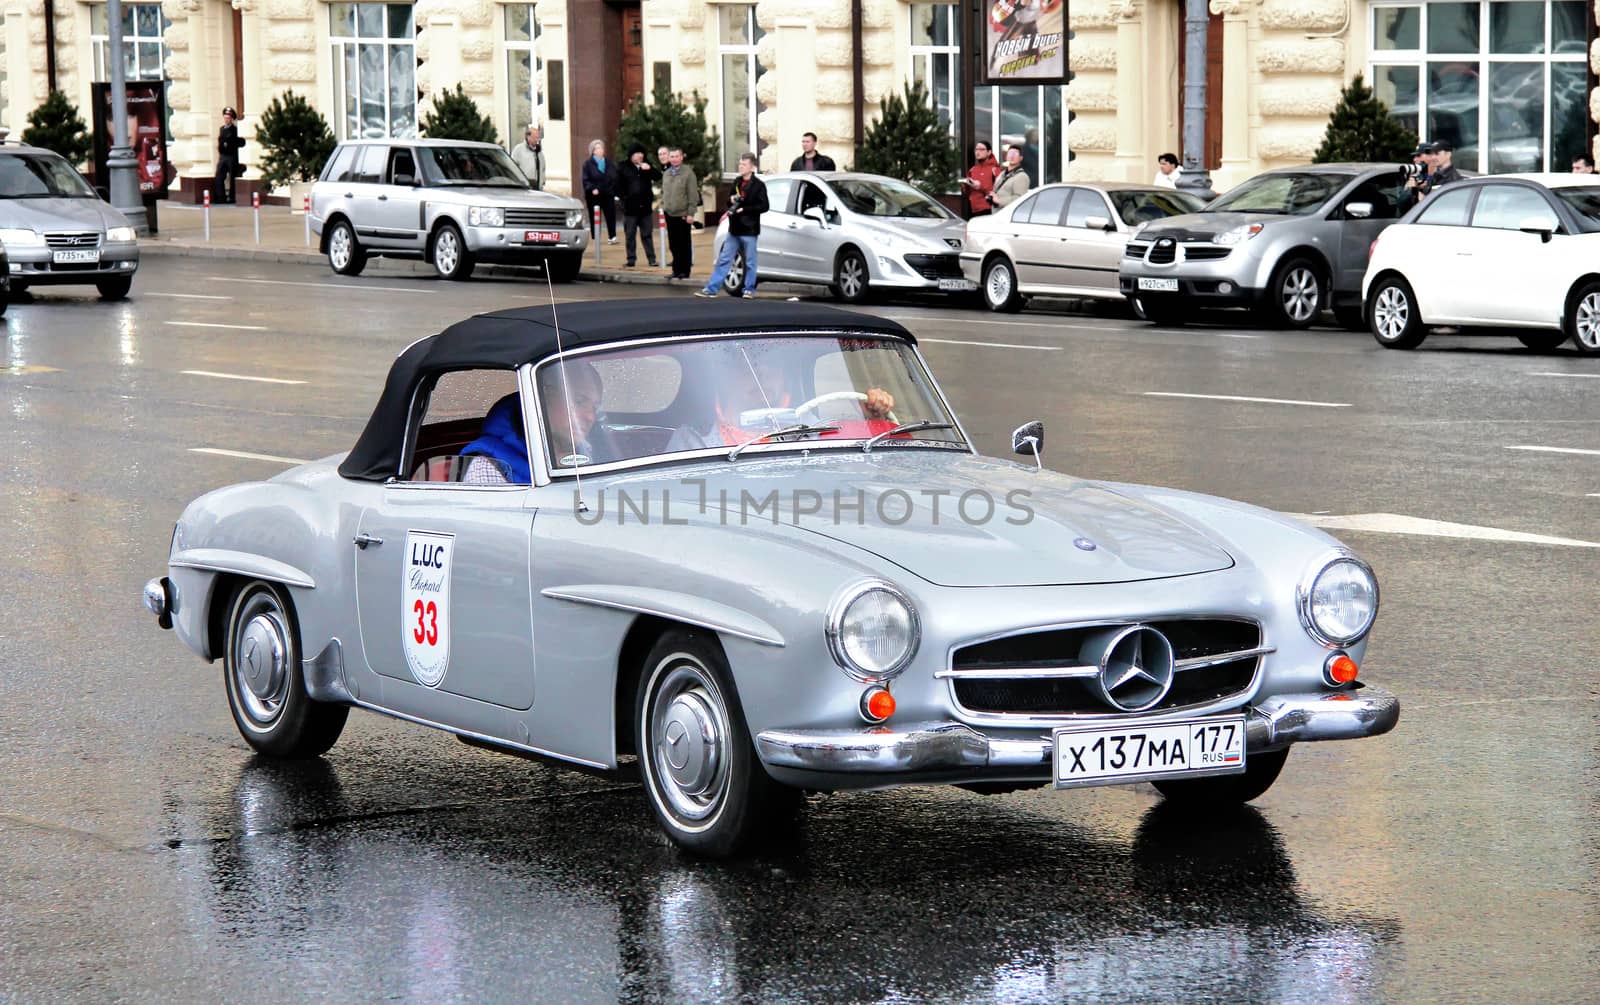 MOSCOW, RUSSIA - JUNE 3: German sportscar Mercedes-Benz 190SL competes at the annual L.U.C. Chopard Classic Weekend Rally on June 3, 2012 in Moscow, Russia.